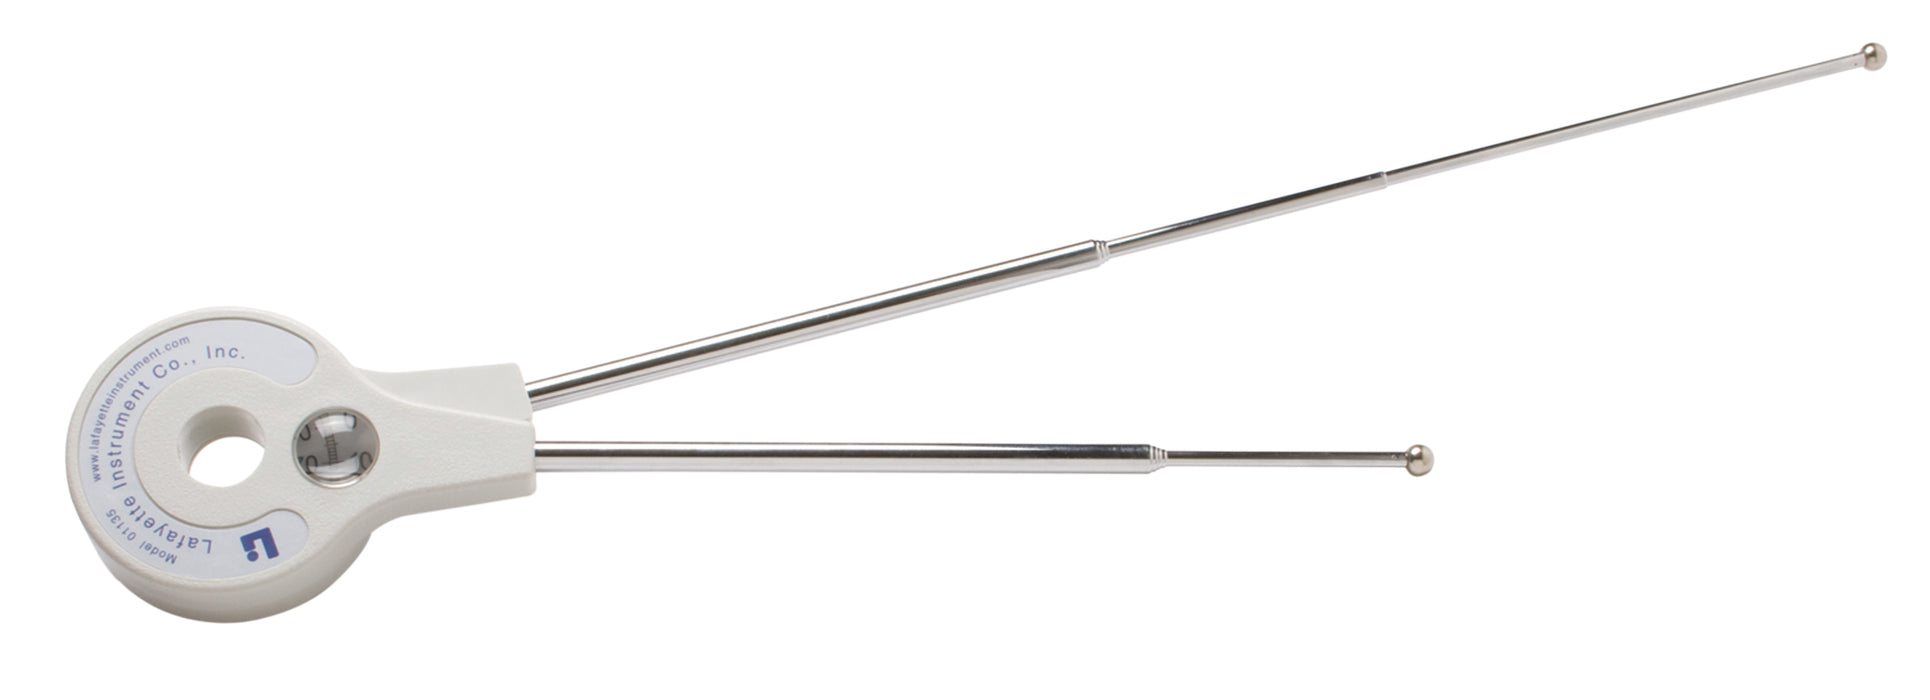 Baseline 12-1035 180 Degree Extendable Legs (9-26") With Magnification